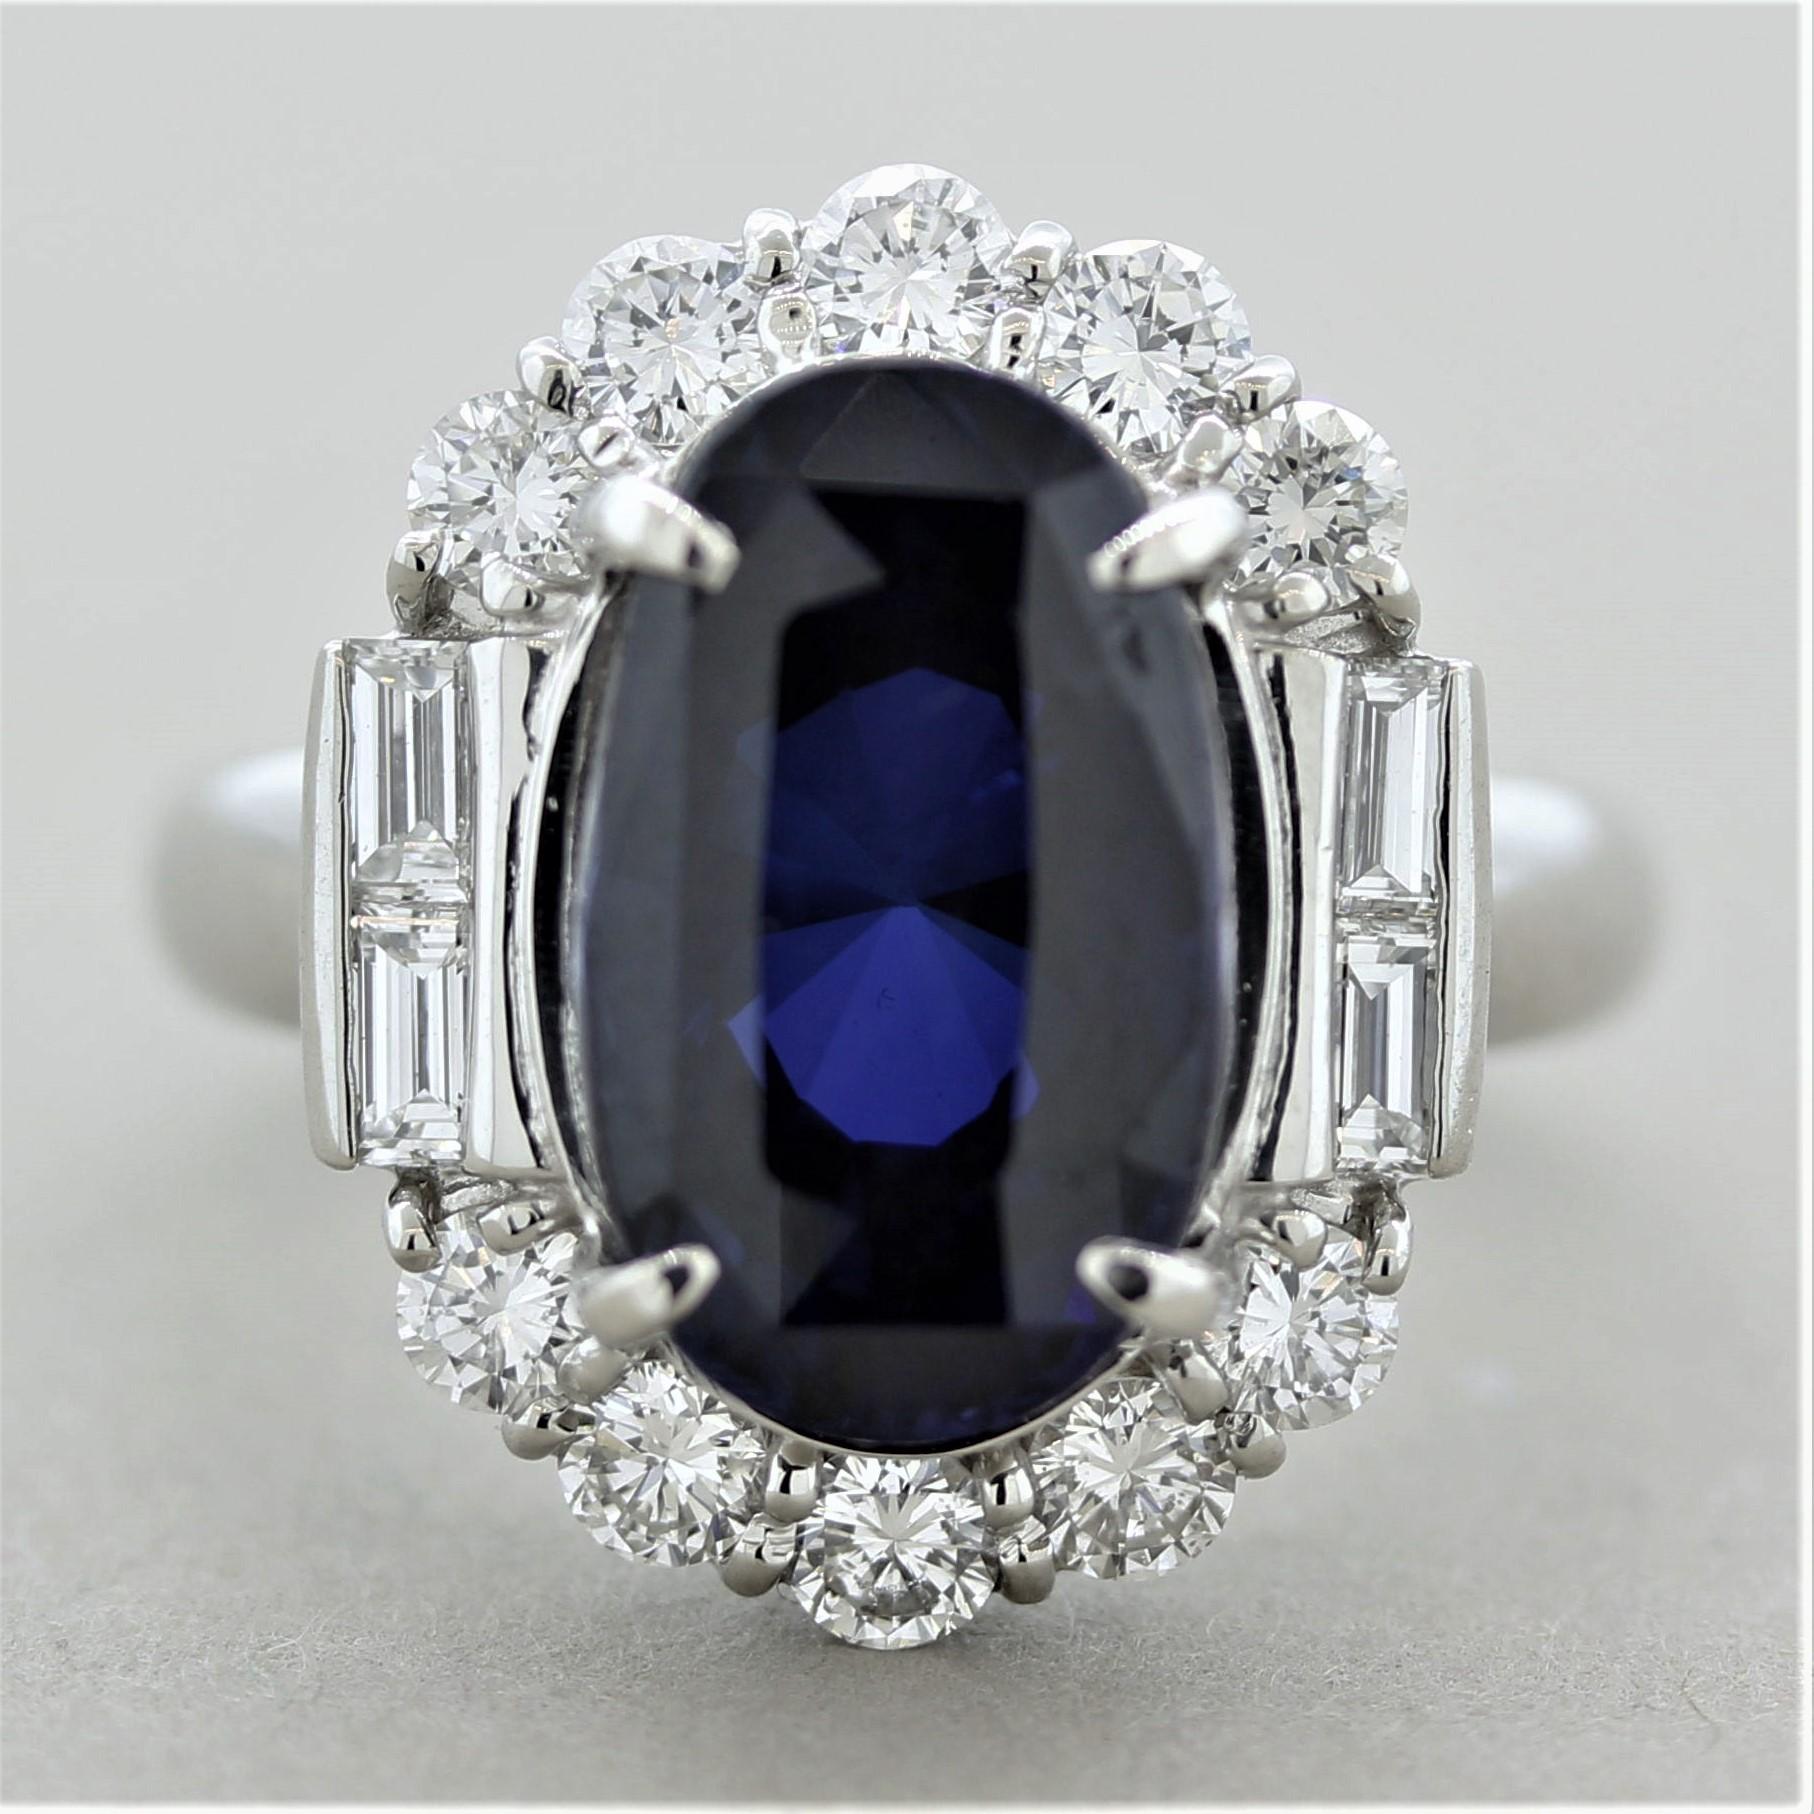 A large and impressive sapphire weighing 8.82 carats! It is certified by the GIA as natural and has an intense vivid midnight blue color. Fully transparent and eye clean, no inclusions can be seen in the stone allowing the vivid blue color to